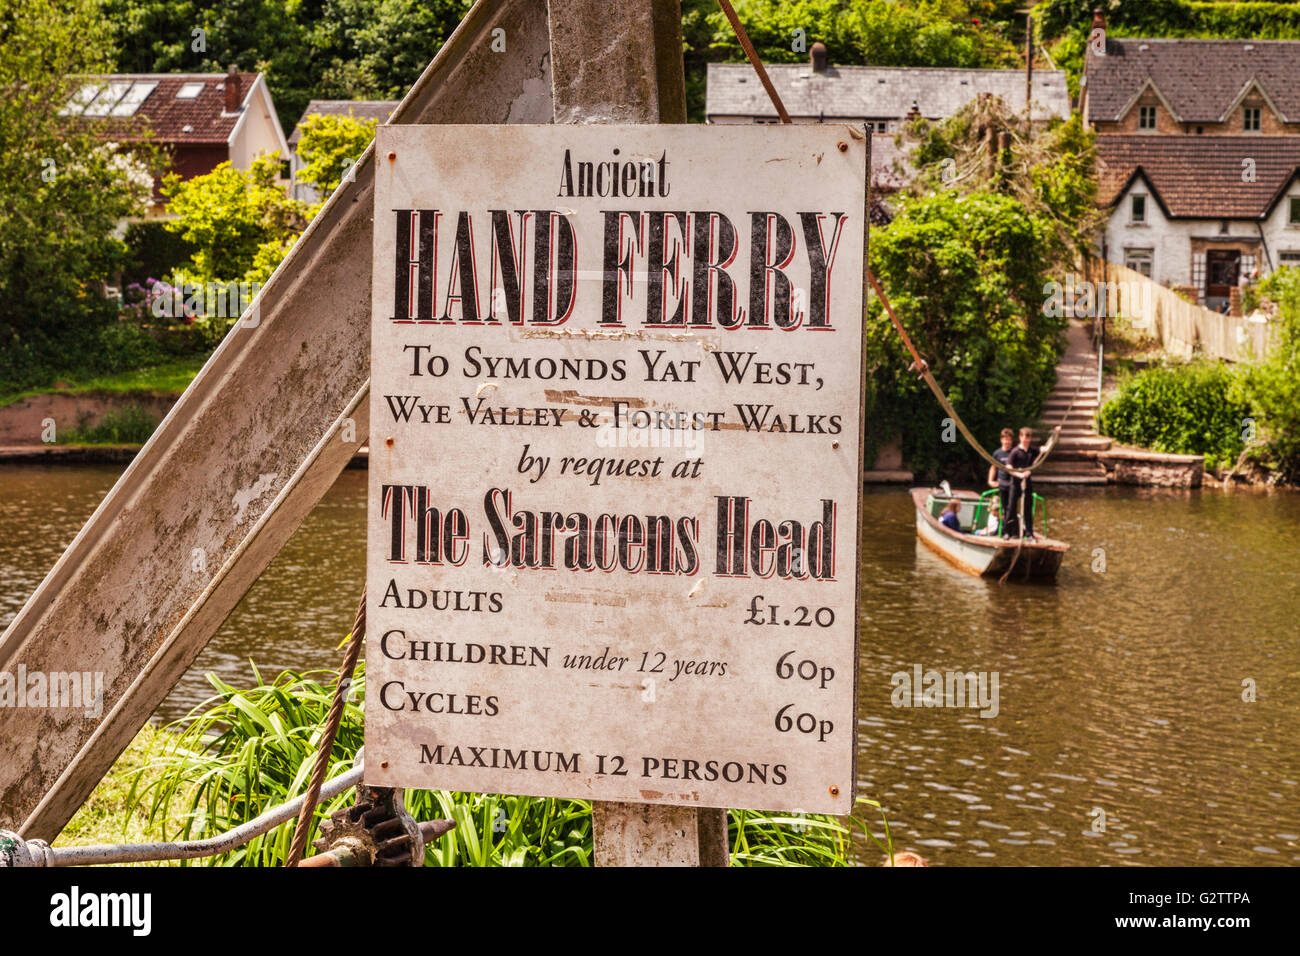 Sign for the Hand Ferry at Symonds Yat, with the boat in the background, Gloucestershire, England, UK Stock Photo